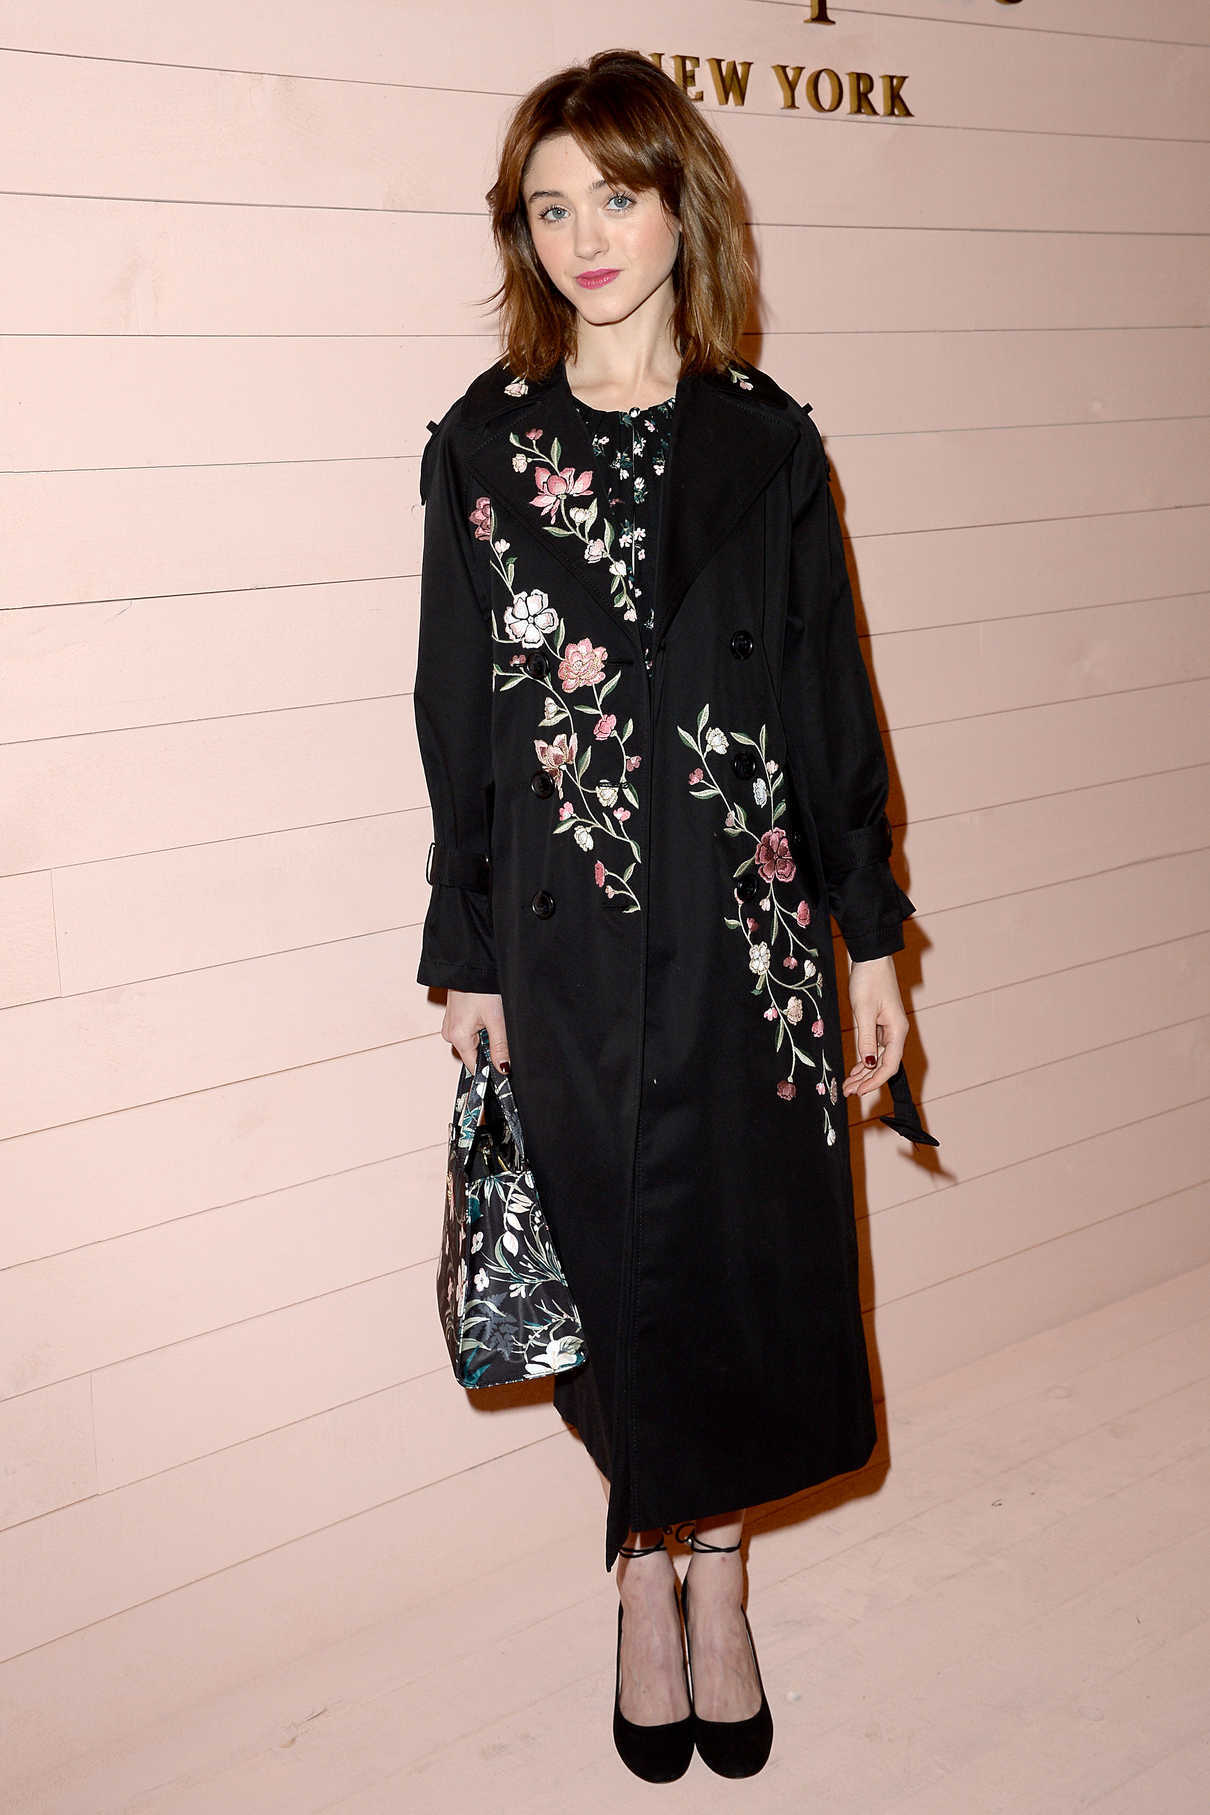 Natalia Dyer at the Kate Spade Presentation During New York Fashion Week in New York City 02/09/2018-2